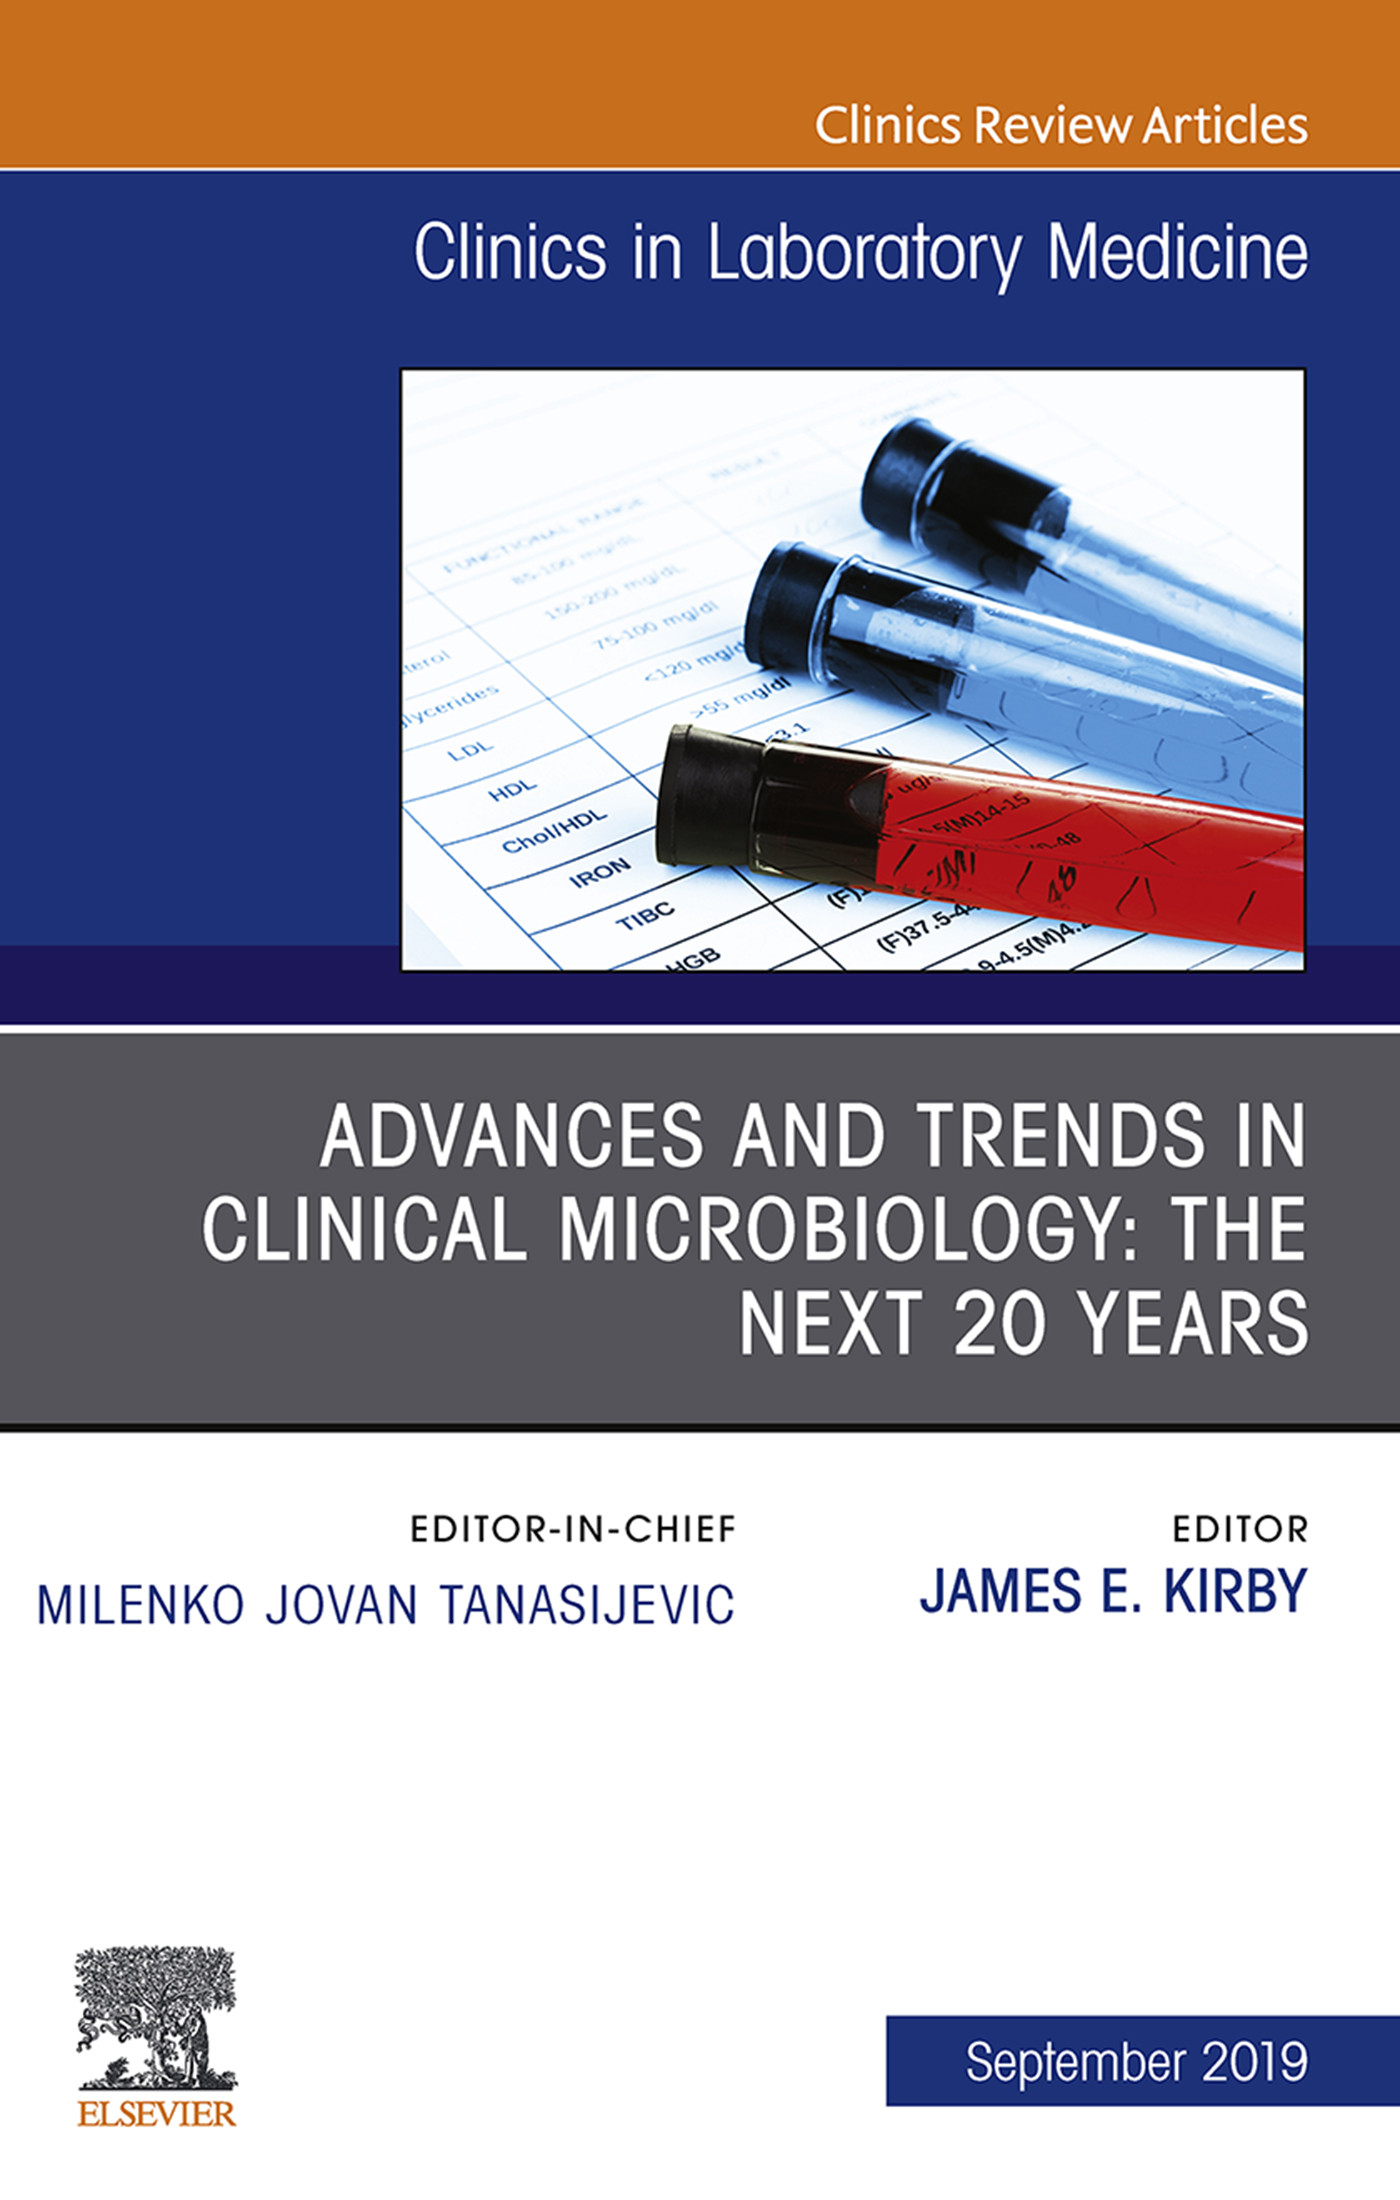 Advances and Trends in Clinical Microbiology: The Next 20 Years, An Issue of the Clinics in Laboratory Medicine E-book